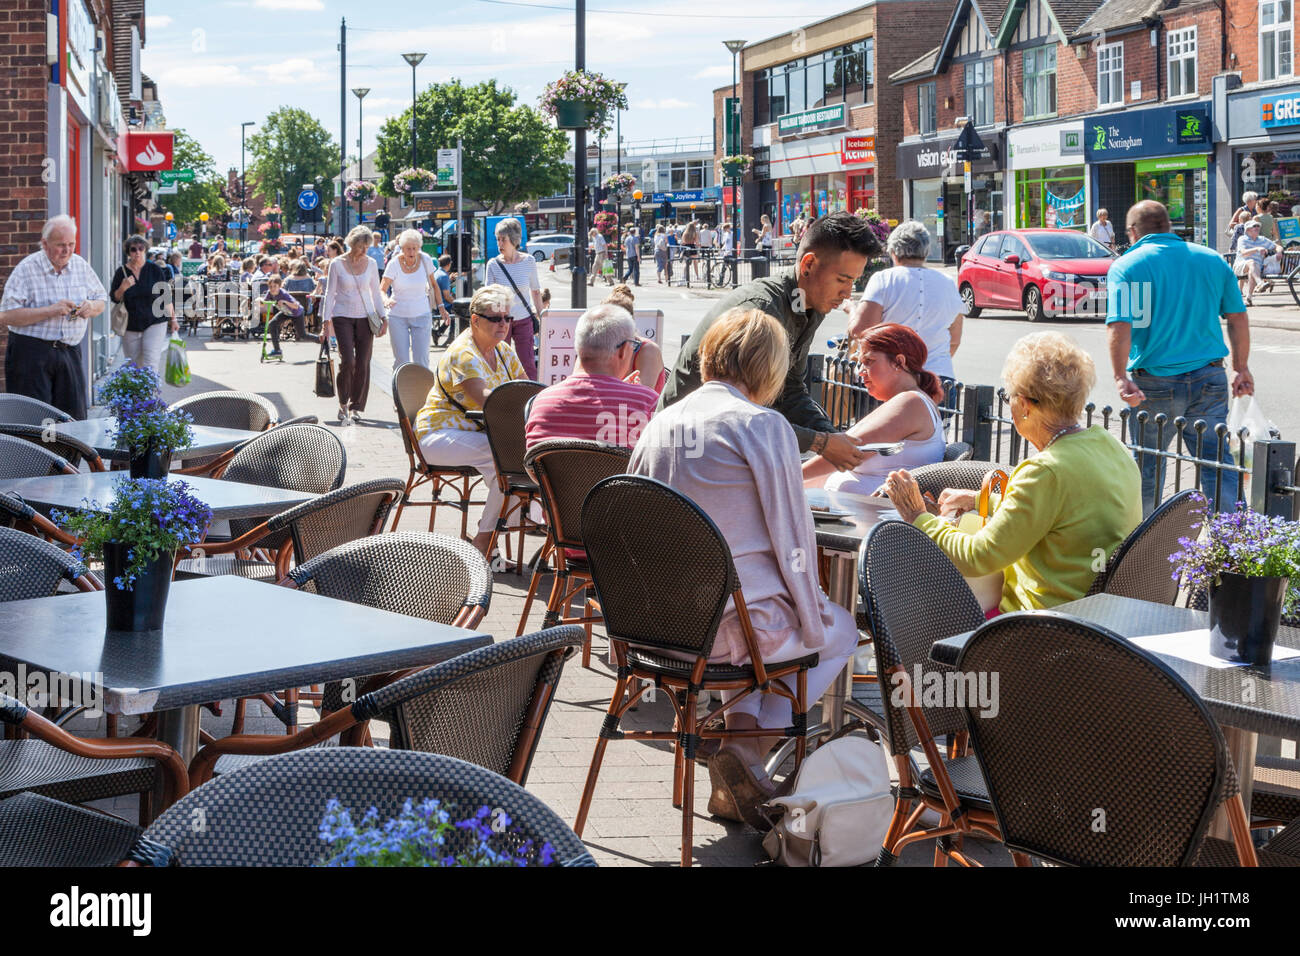 Outdoor cafes. People sitting outside at a pavement cafe on a sunny day, West Bridgford, Nottinghamshire, England, UK Stock Photo